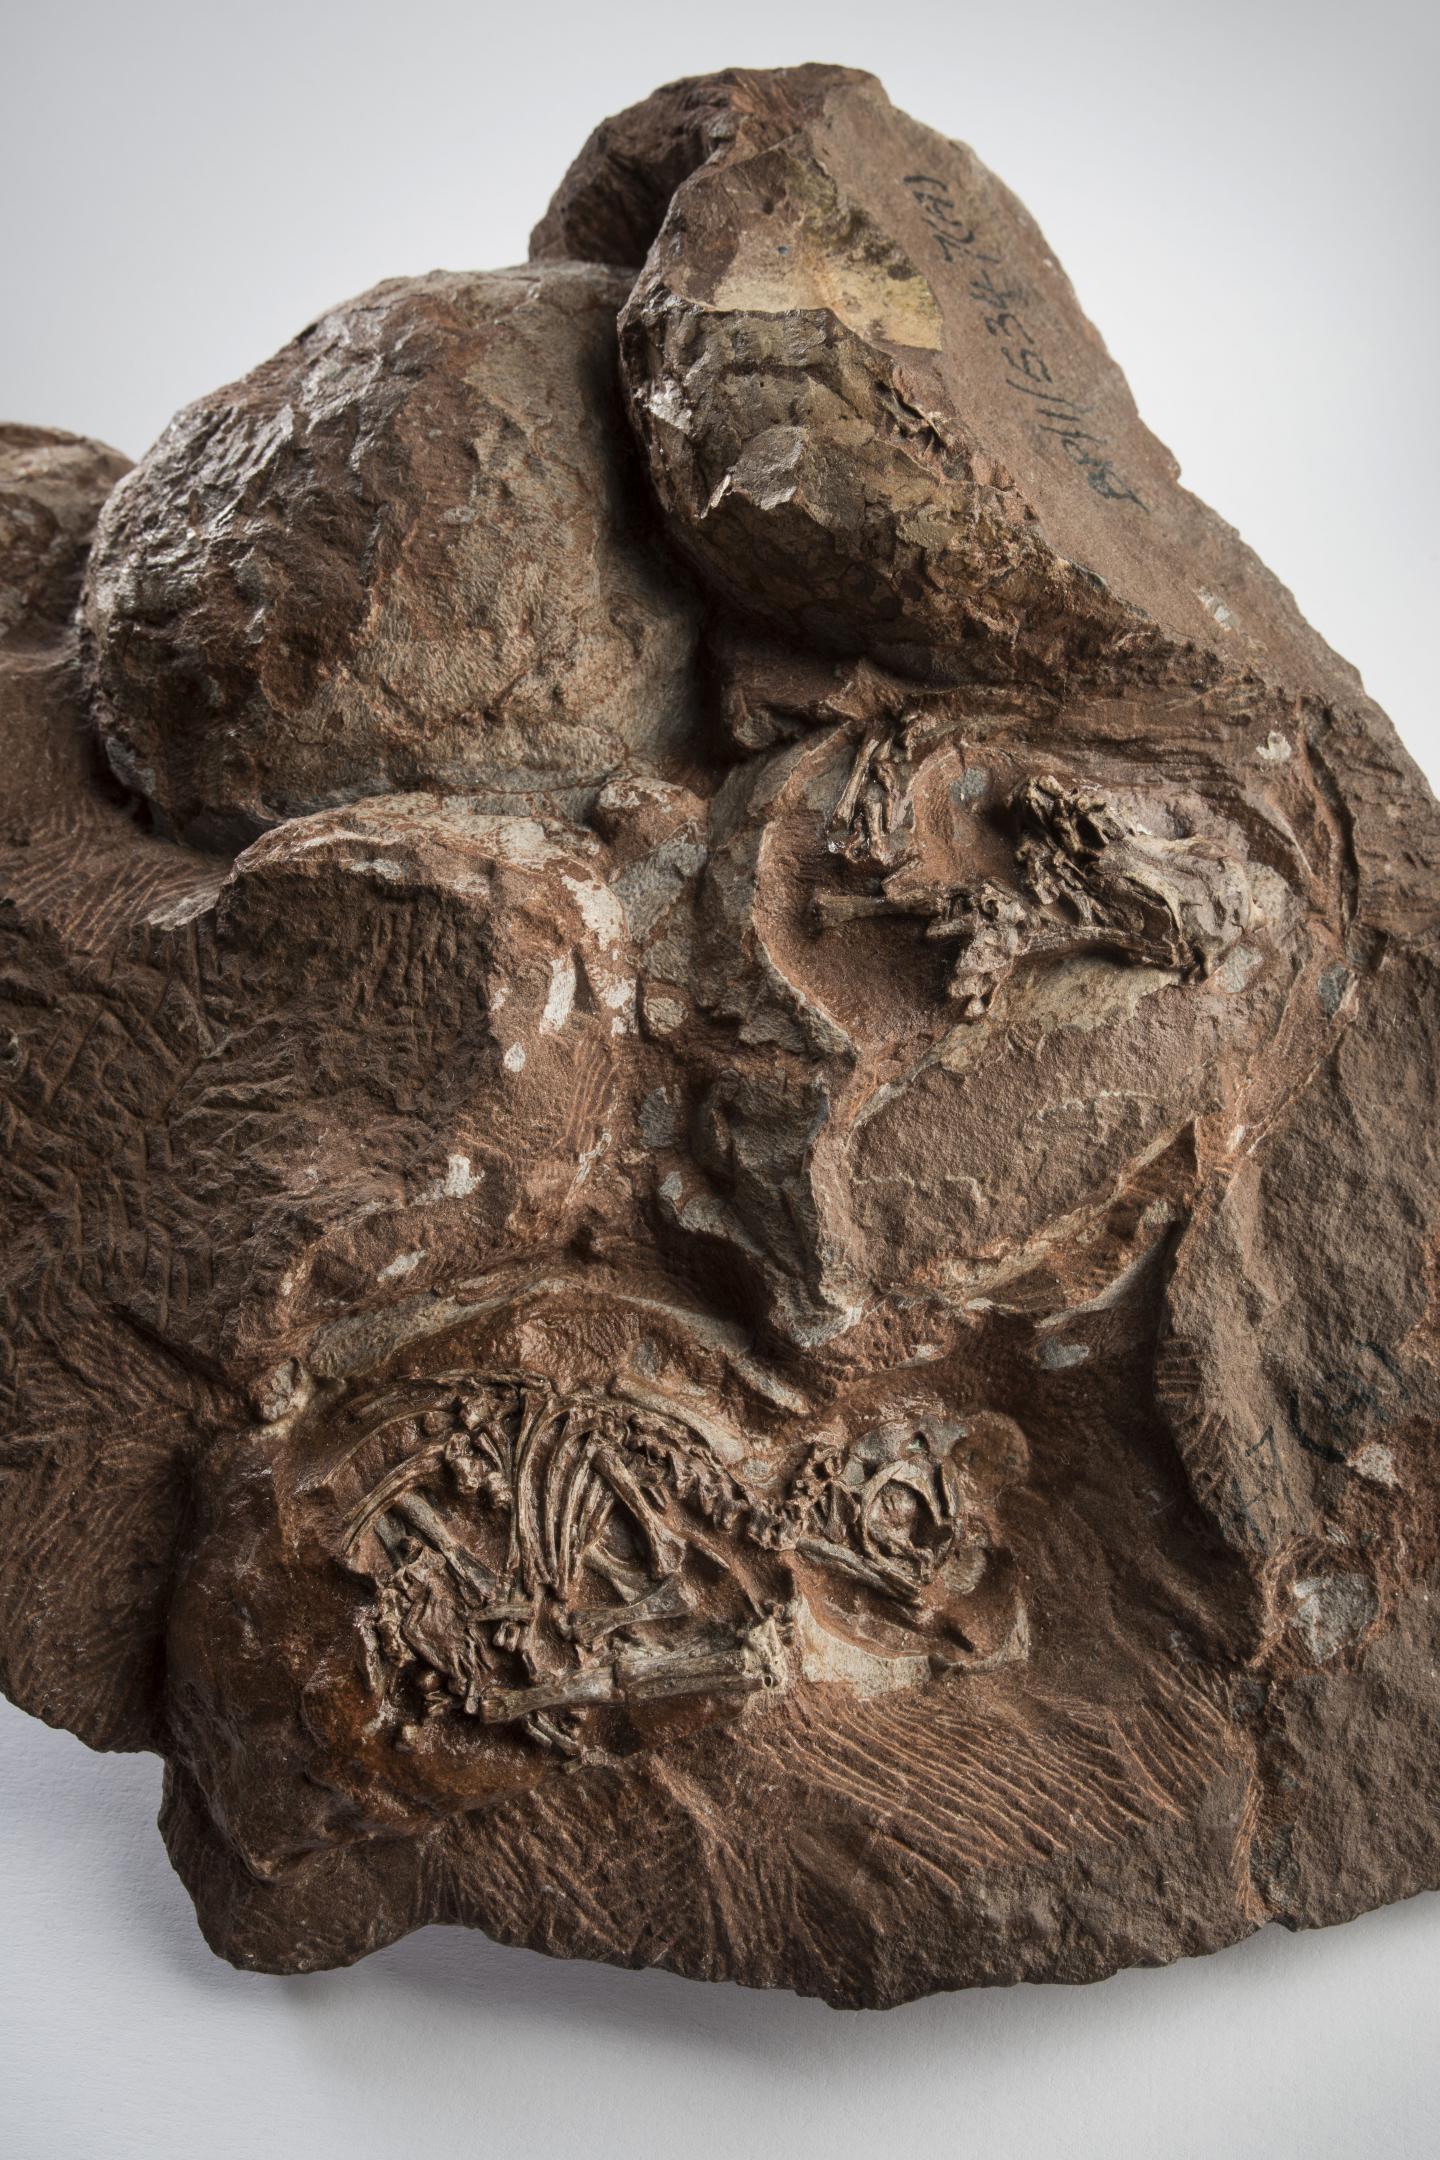 Some of the world's oldest known dinosaur eggs and embryos.